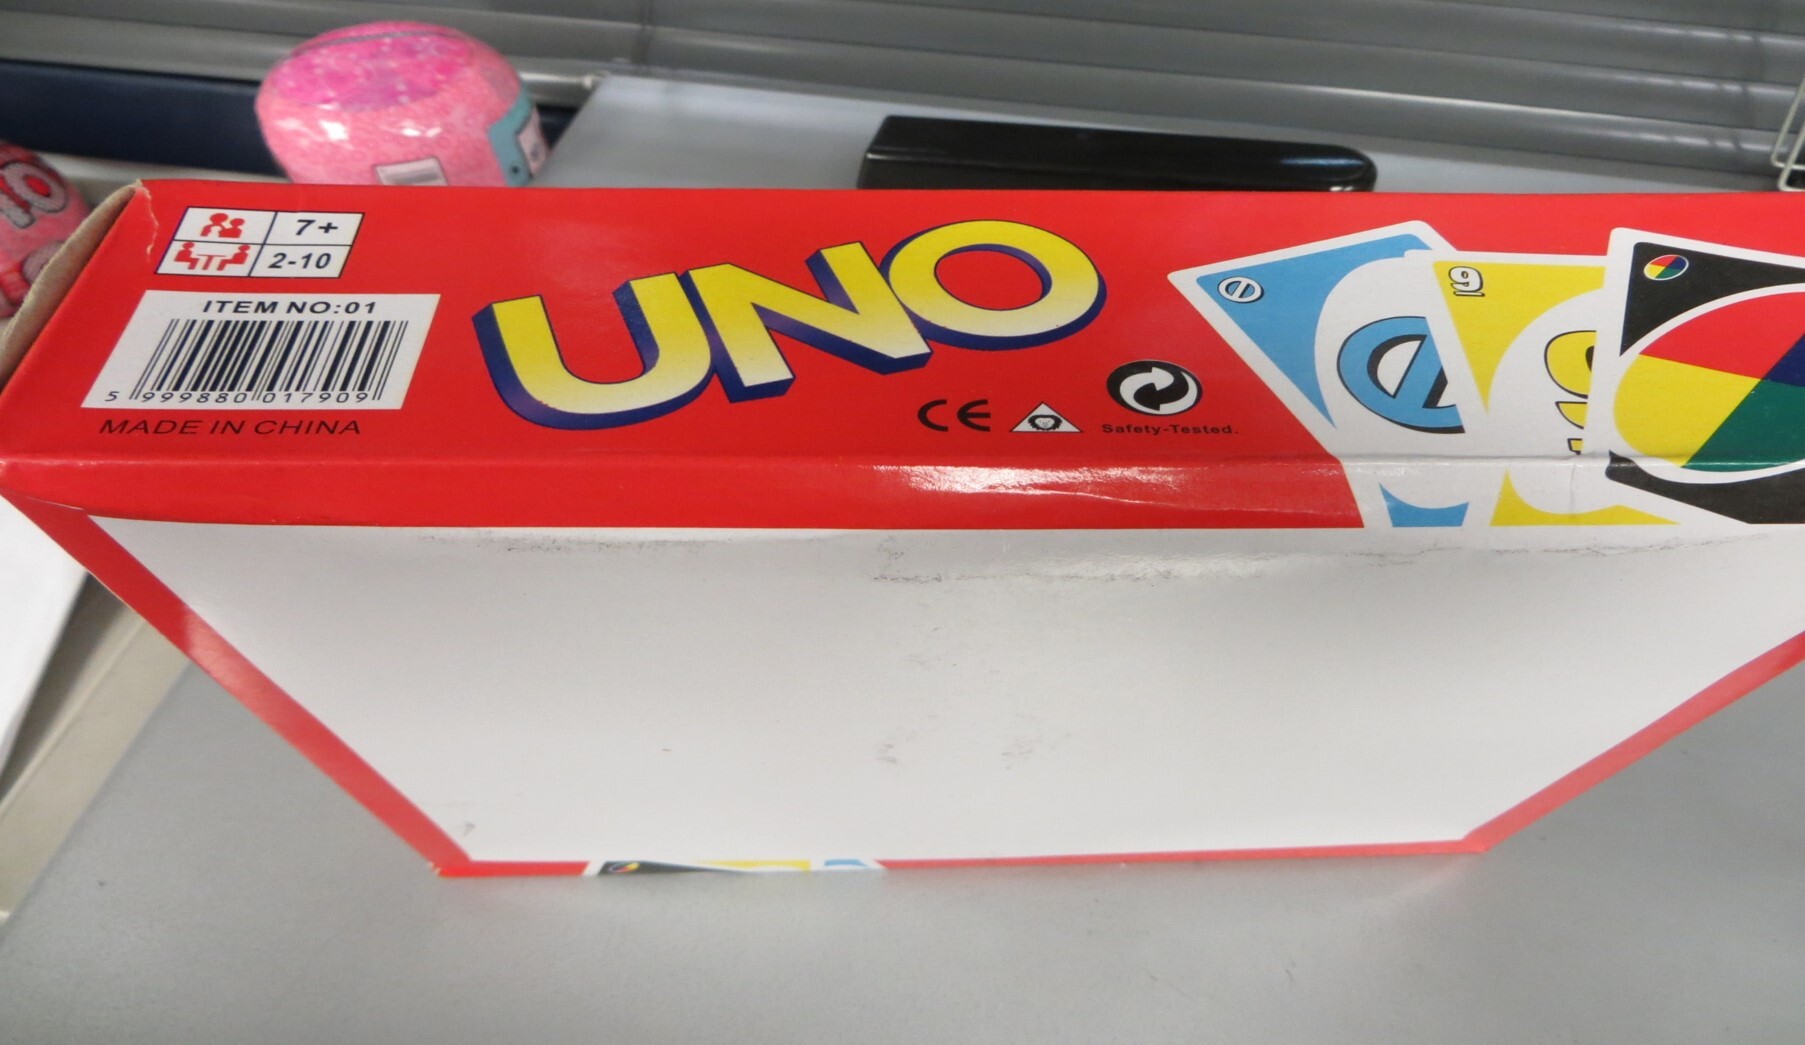 Nearly $1.3 Million in Counterfeit Toys, Including Fake UNO Cards